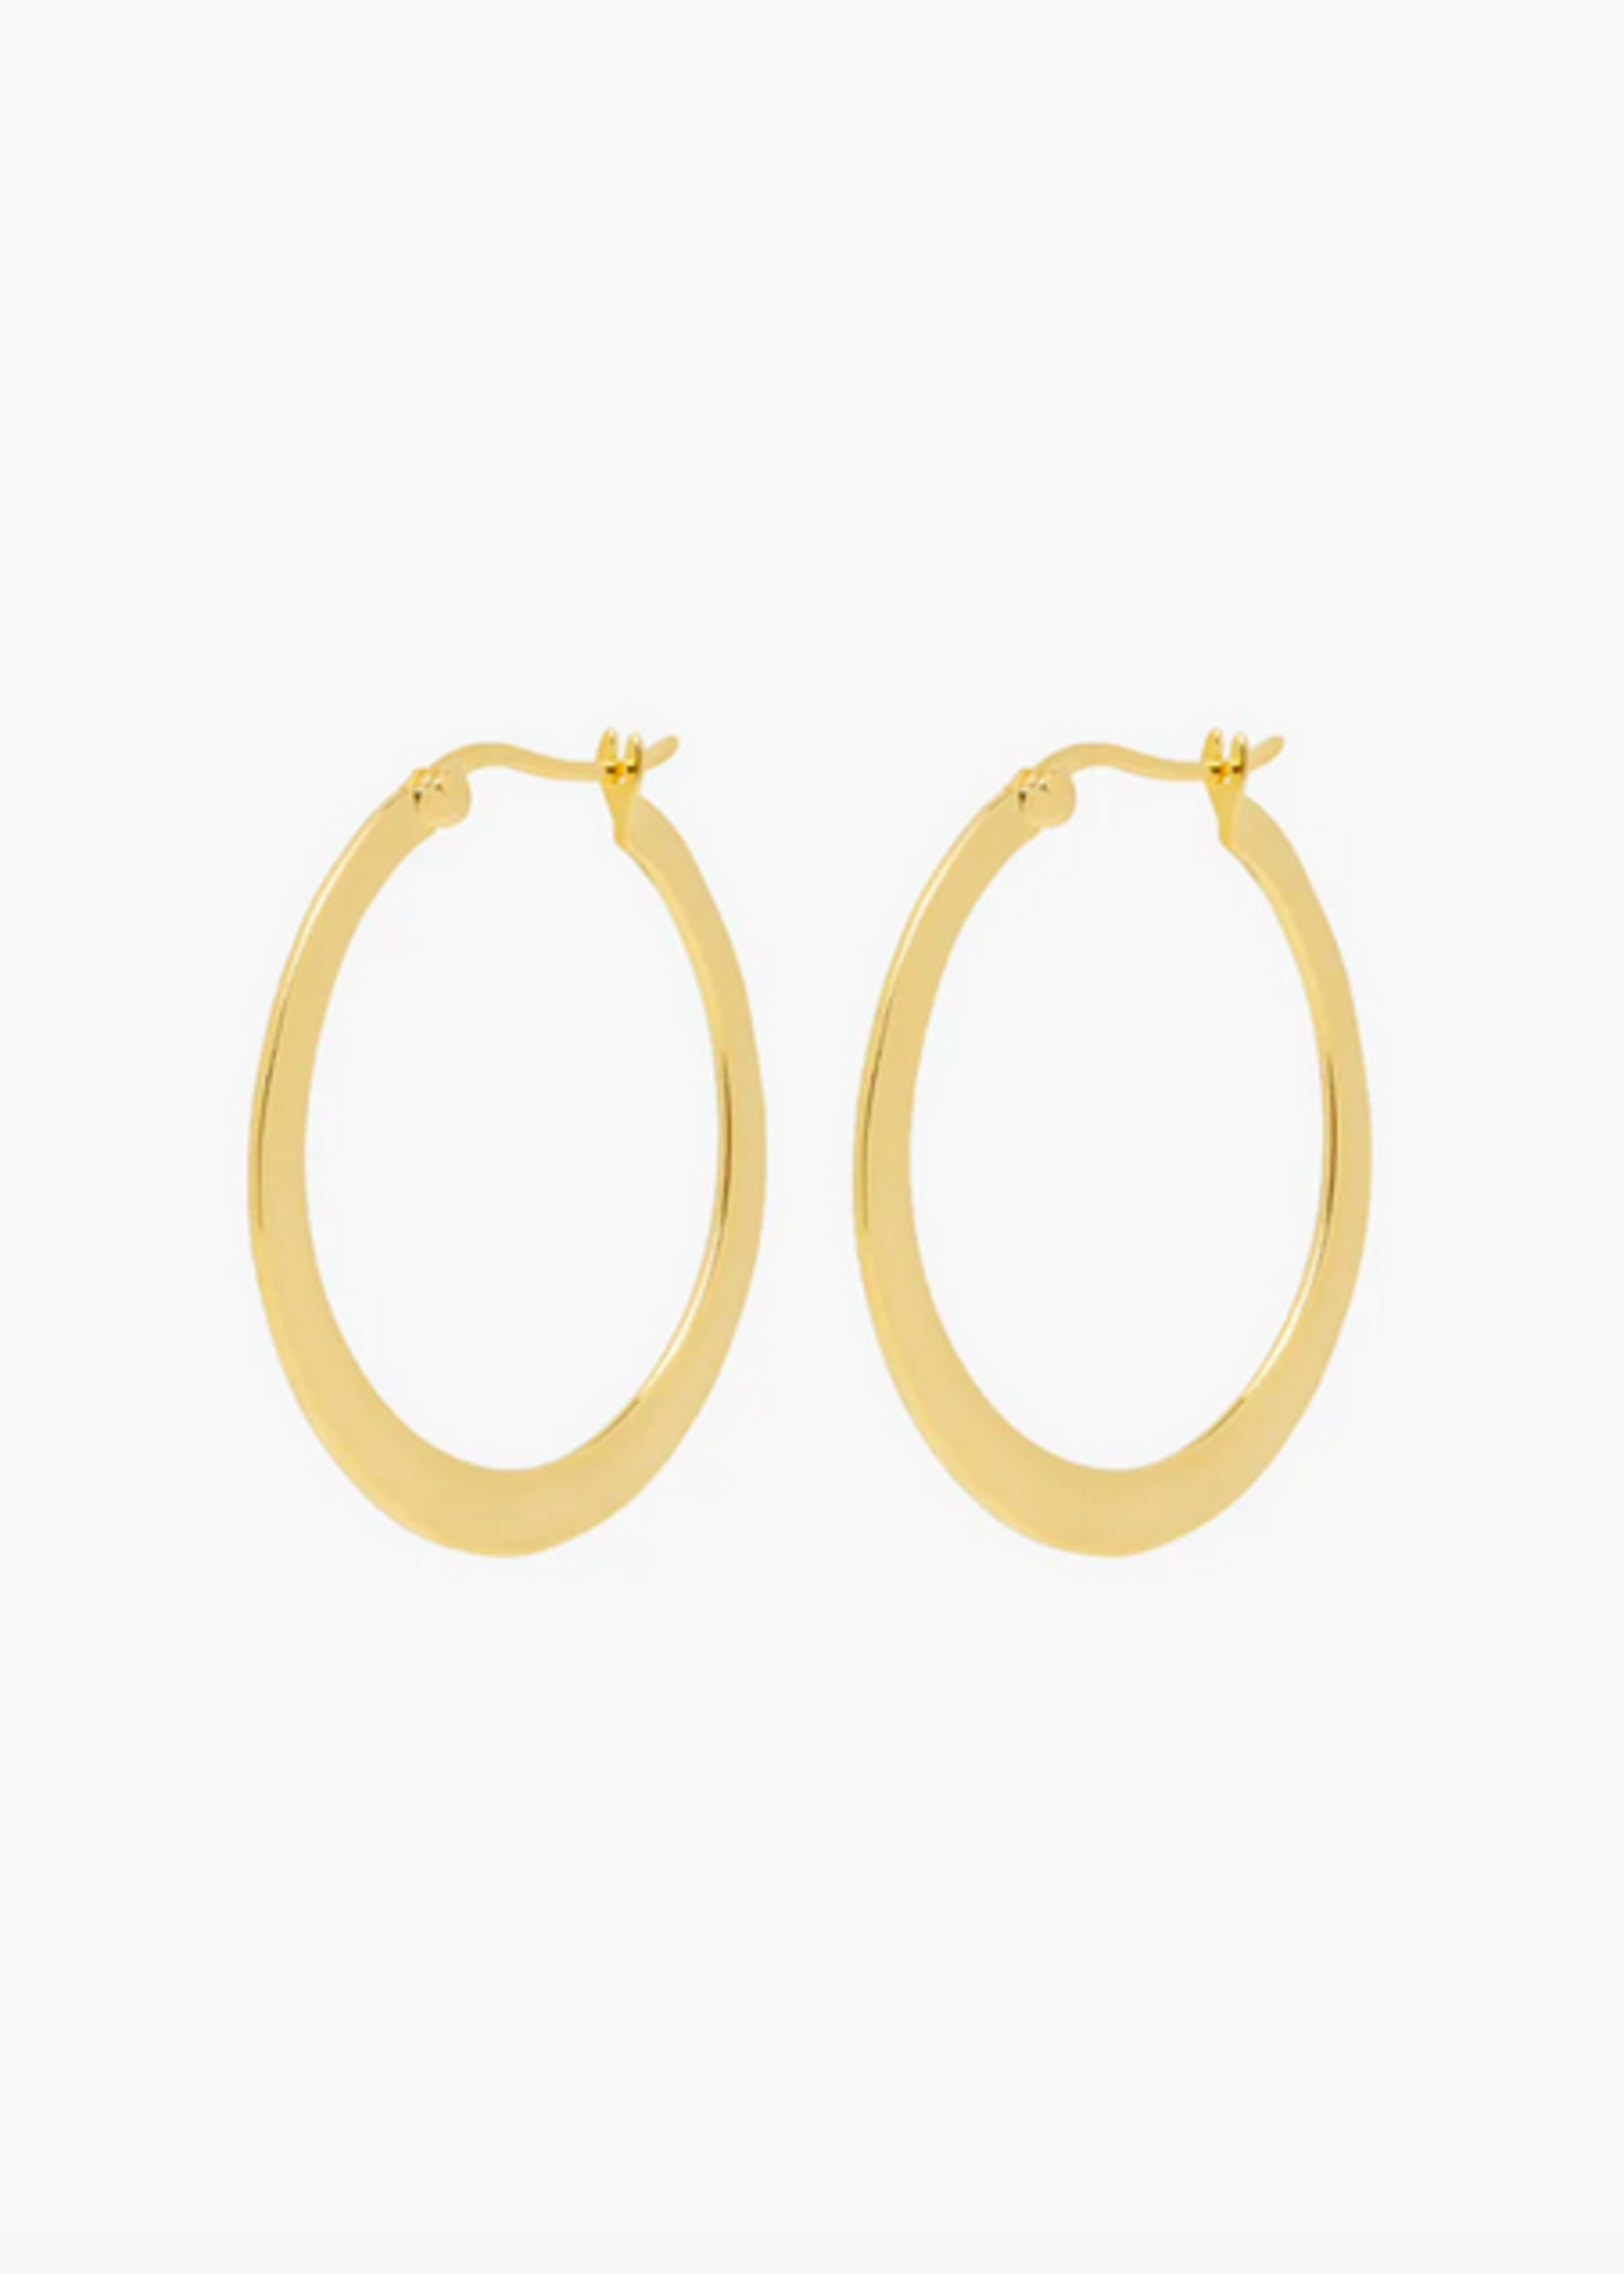 Wildthings Collectables Chunky hoop gold plated (30mm) earrings